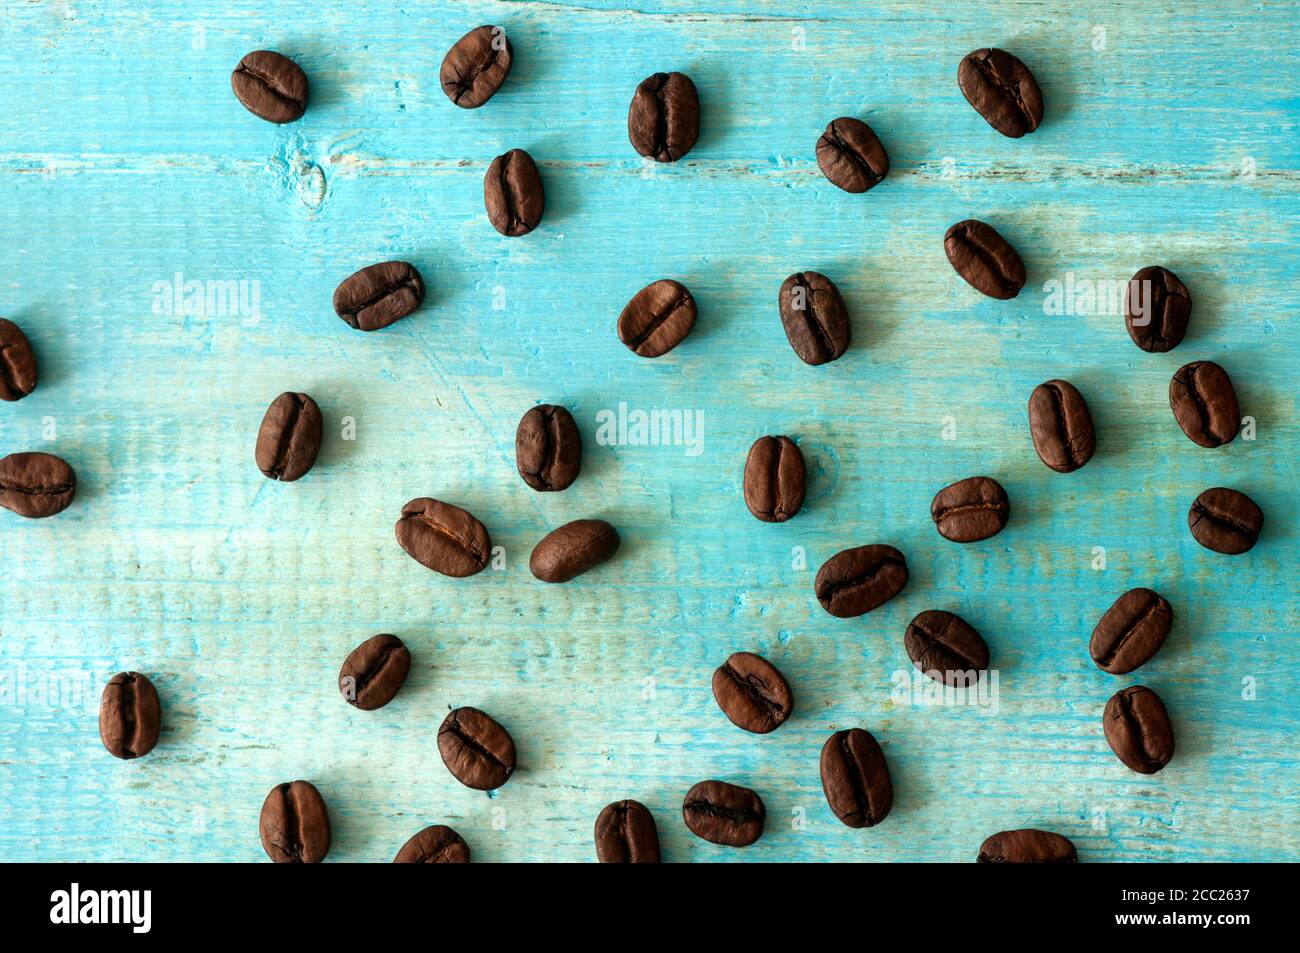 Coffee beans on wooden table, close up Stock Photo